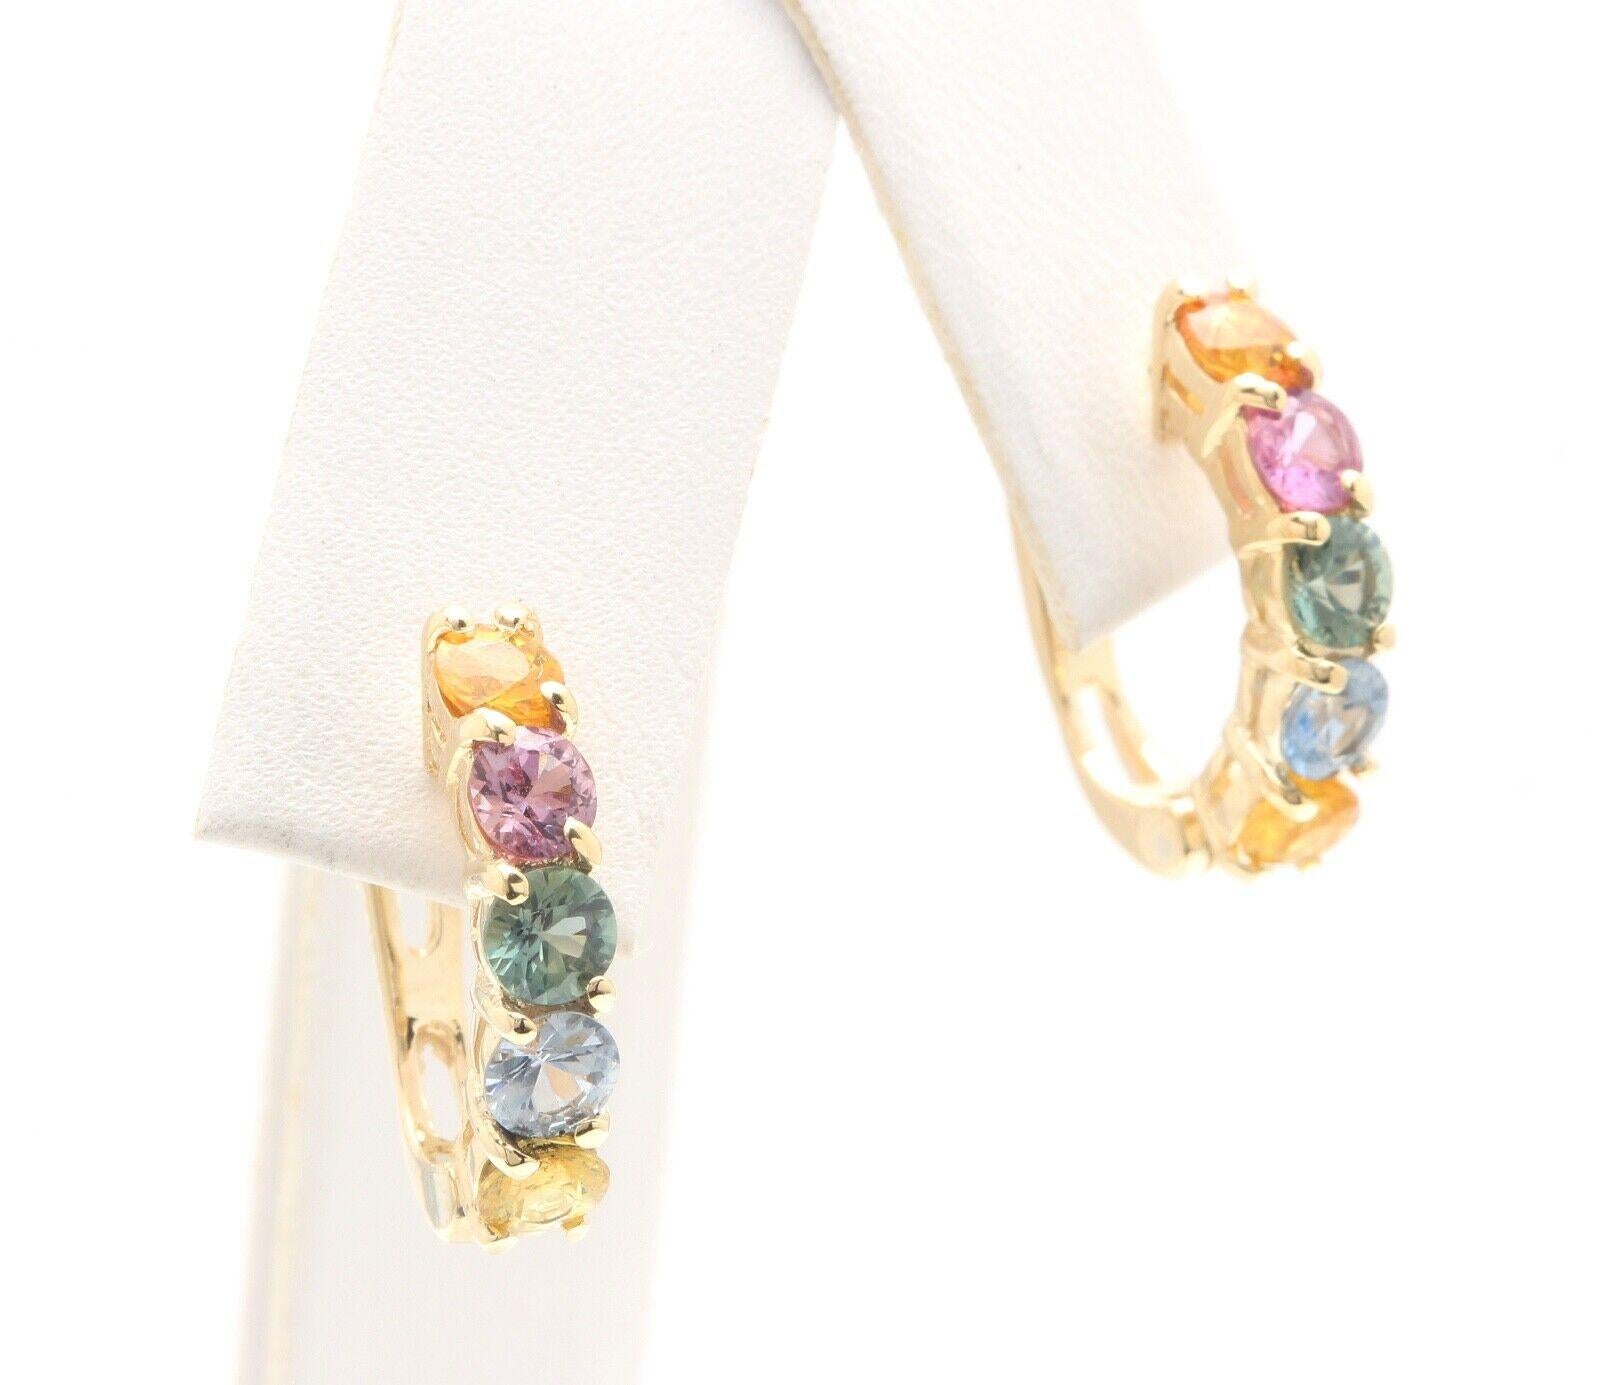 2.60 Carats Natural Multi-Color Sapphire 14K Solid Yellow Gold Earrings

Amazing looking piece! 

Total Natural Round Cut Sapphires Weight is Approx. 2.60 Carats (both earrings)

Earring Measures: 17.85 x 14.30mm

Total Earrings Weight is: 4.5